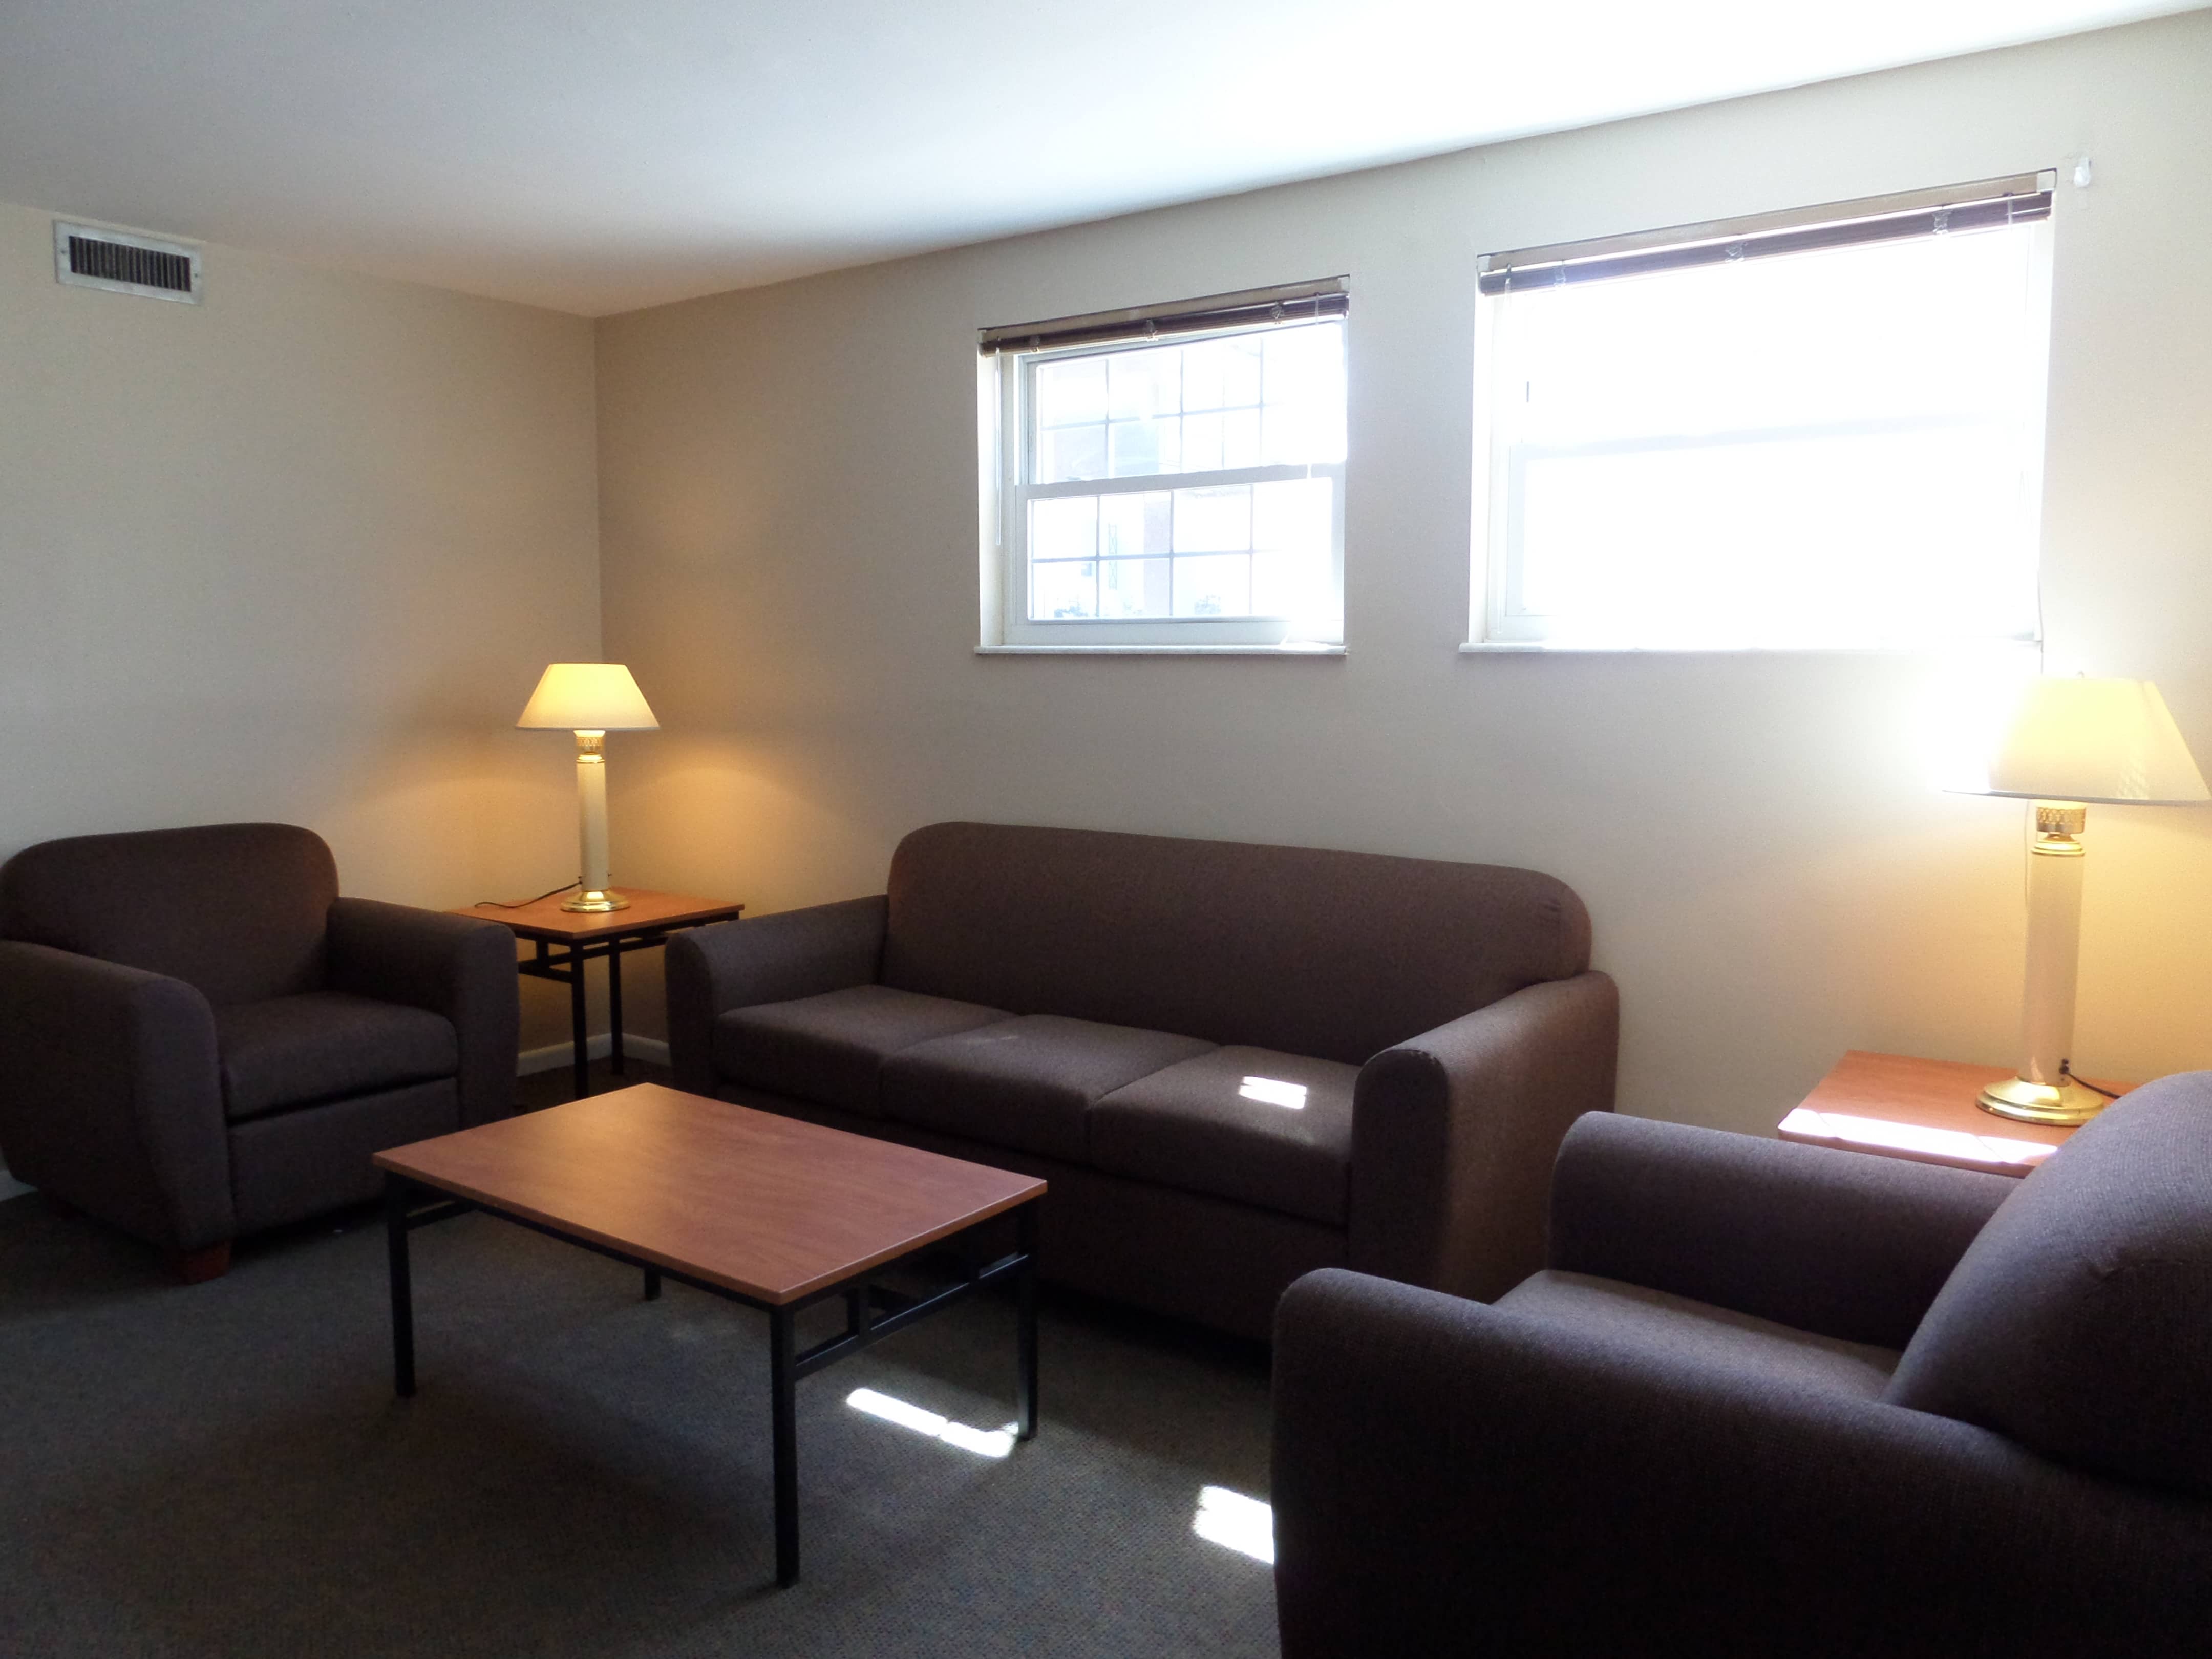 Shared lounge with comfortable couches and chairs